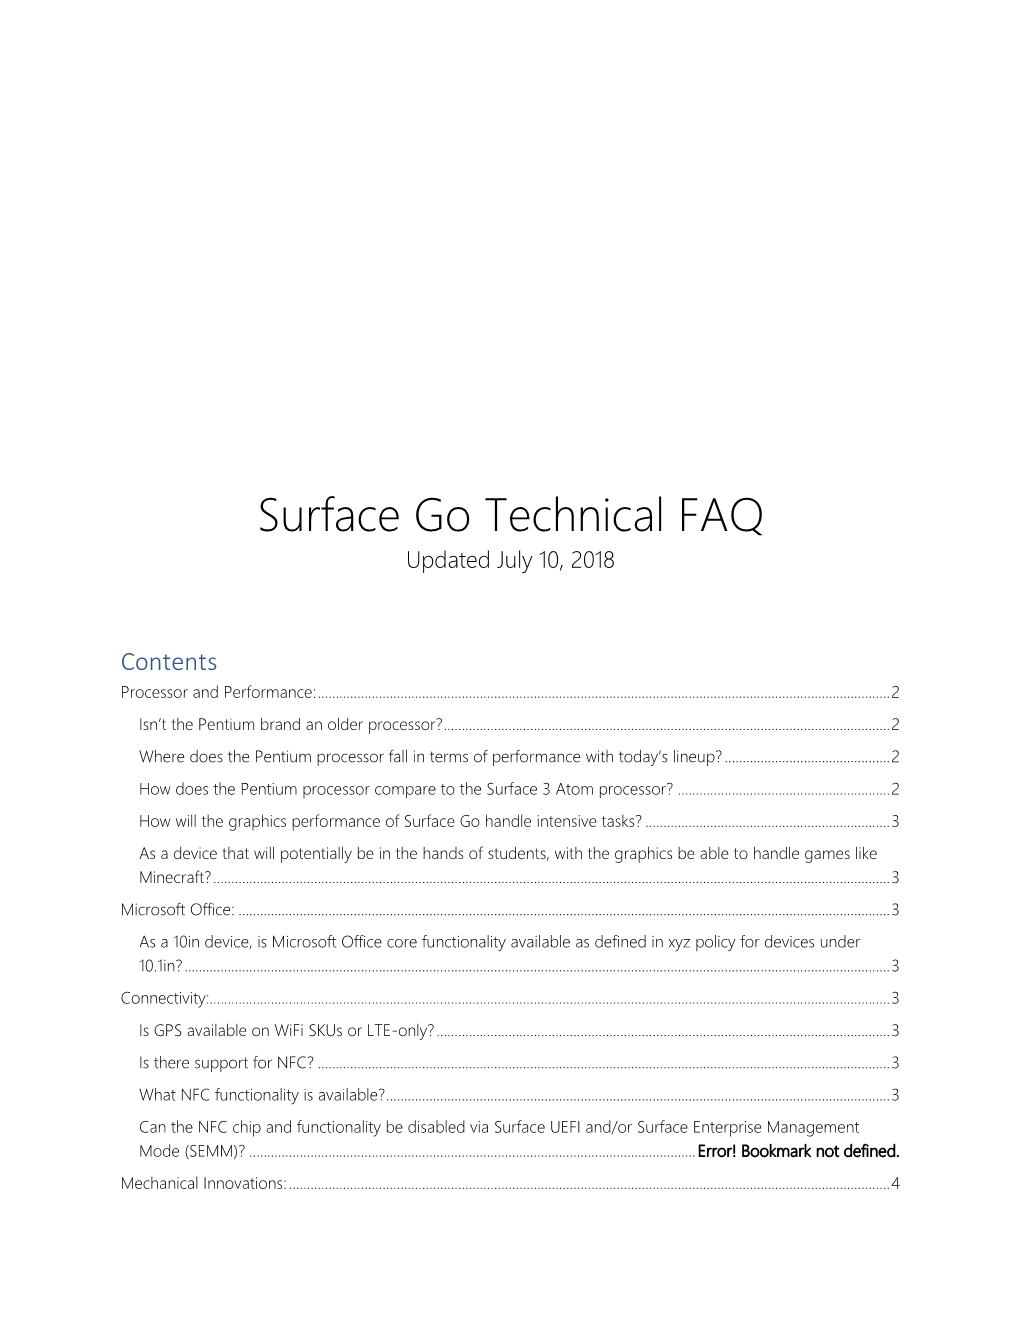 Surface Go Technical Faq for Partners